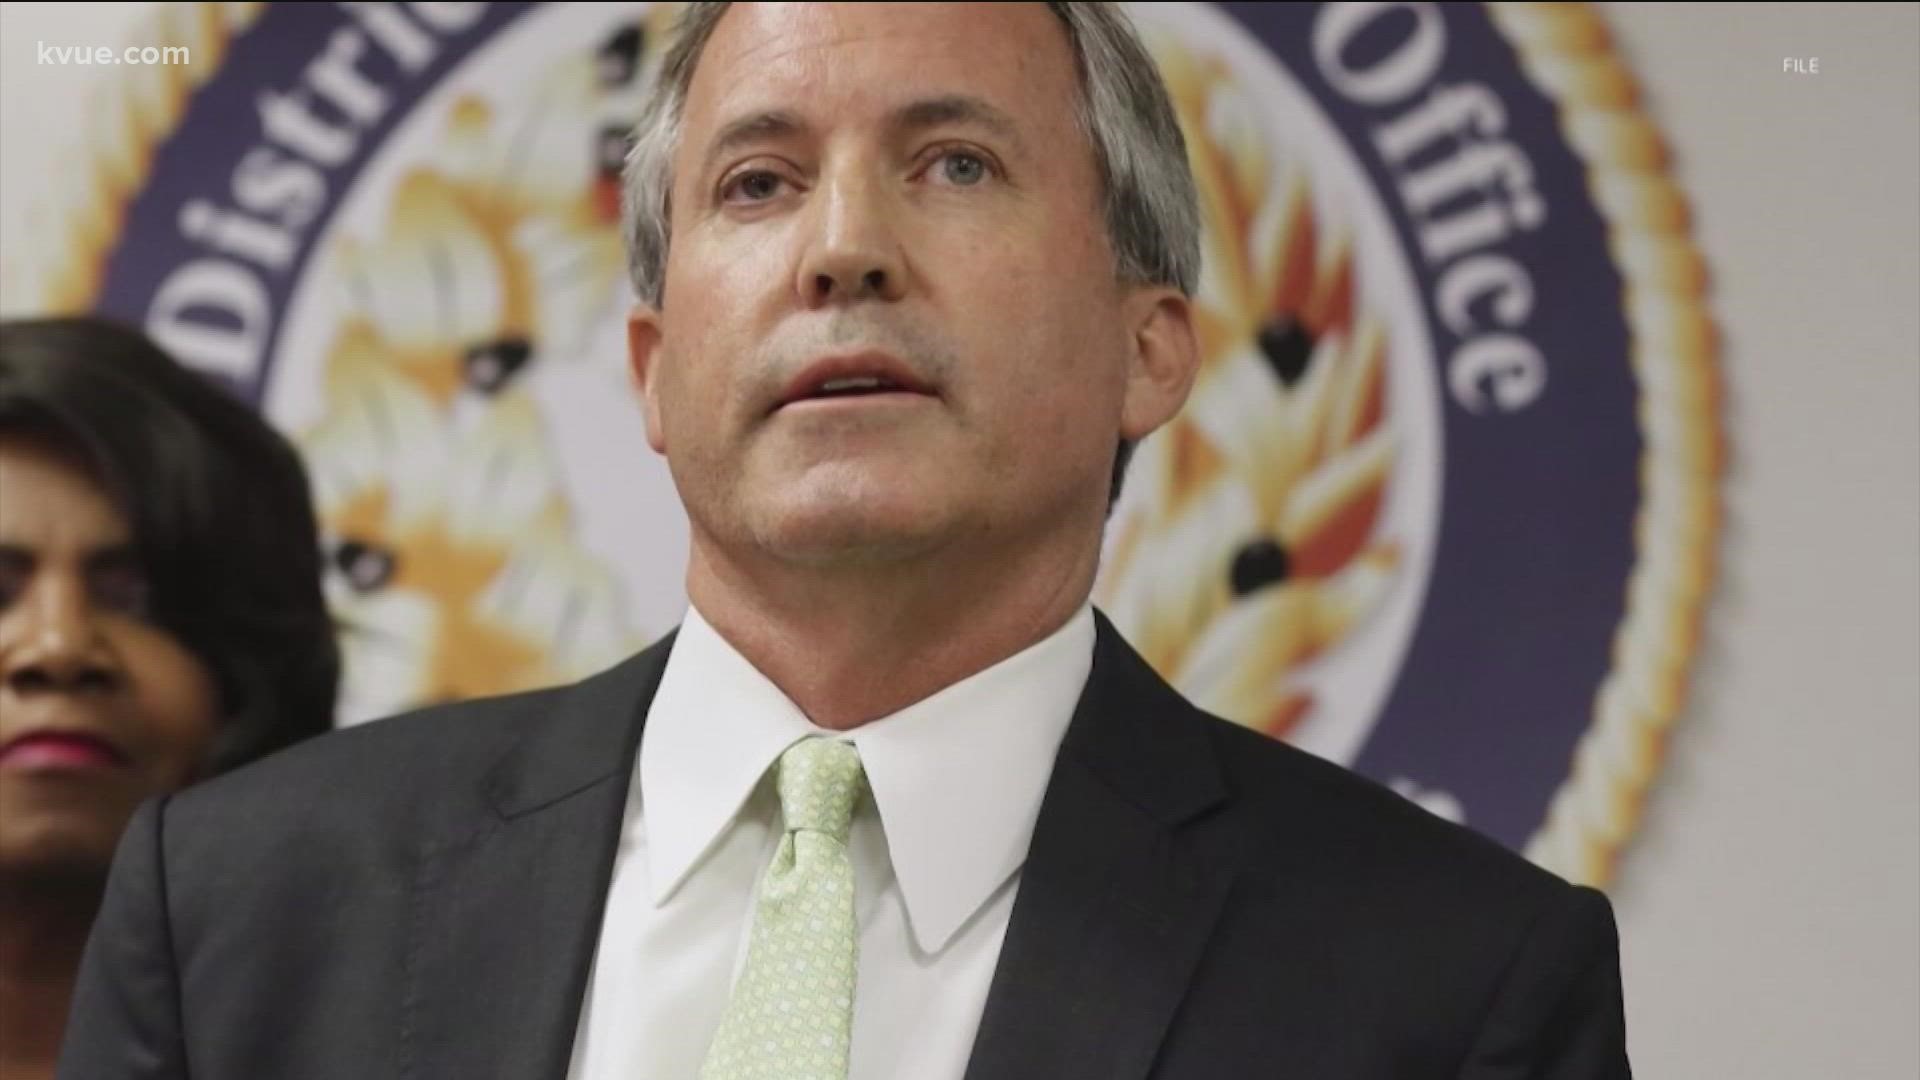 The investigation was conducted by Attorney General Ken Paxton's office. An FBI investigation remains ongoing.